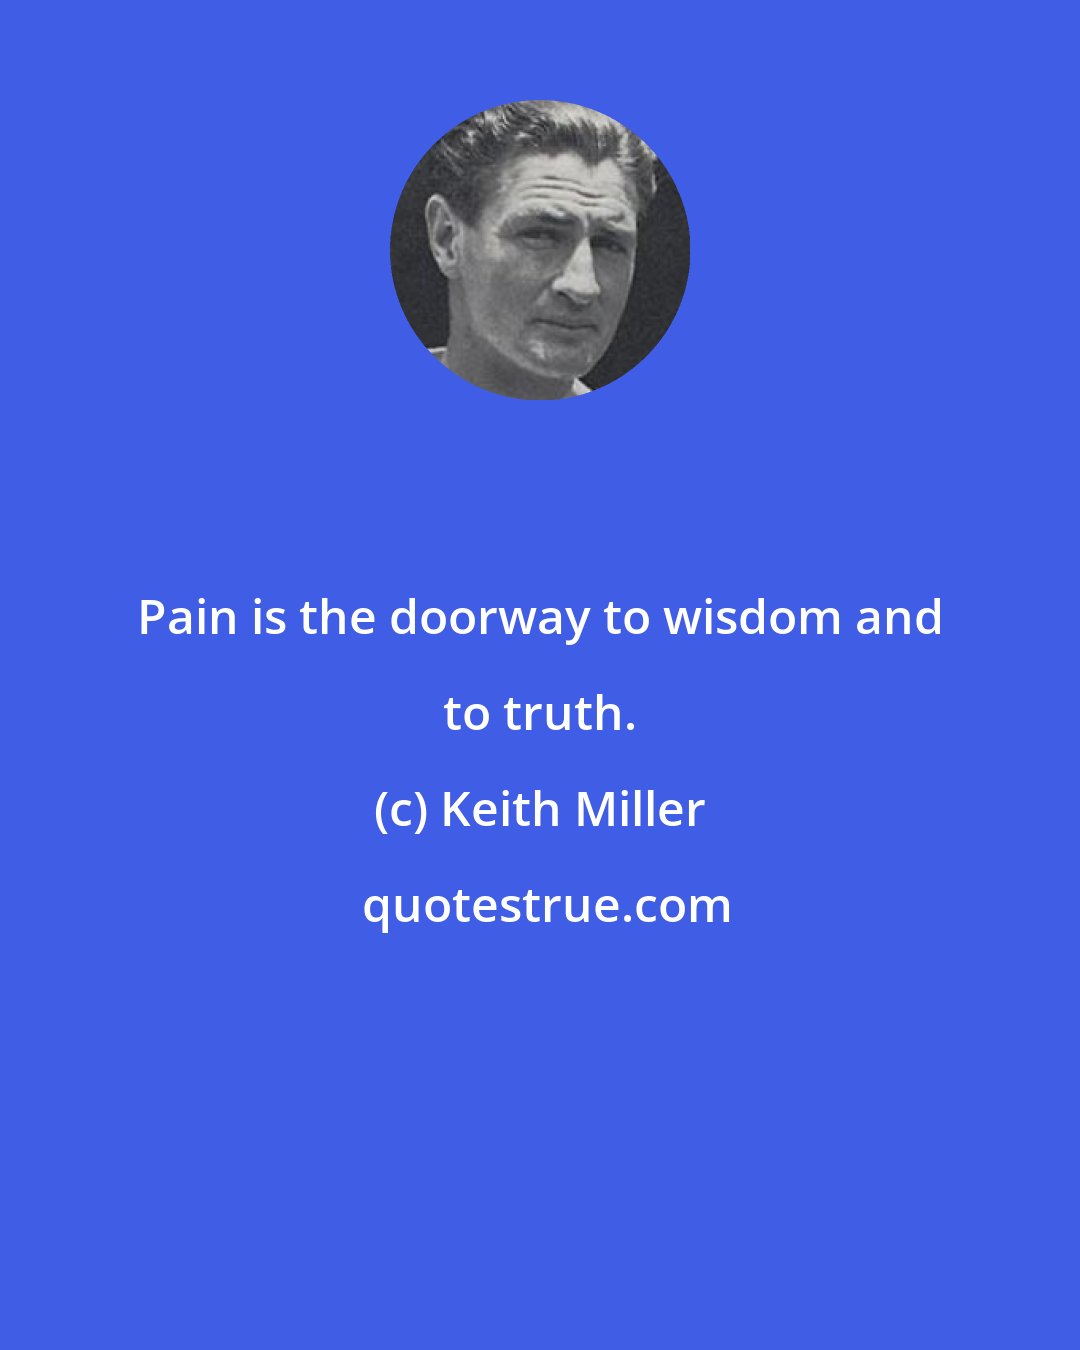 Keith Miller: Pain is the doorway to wisdom and to truth.